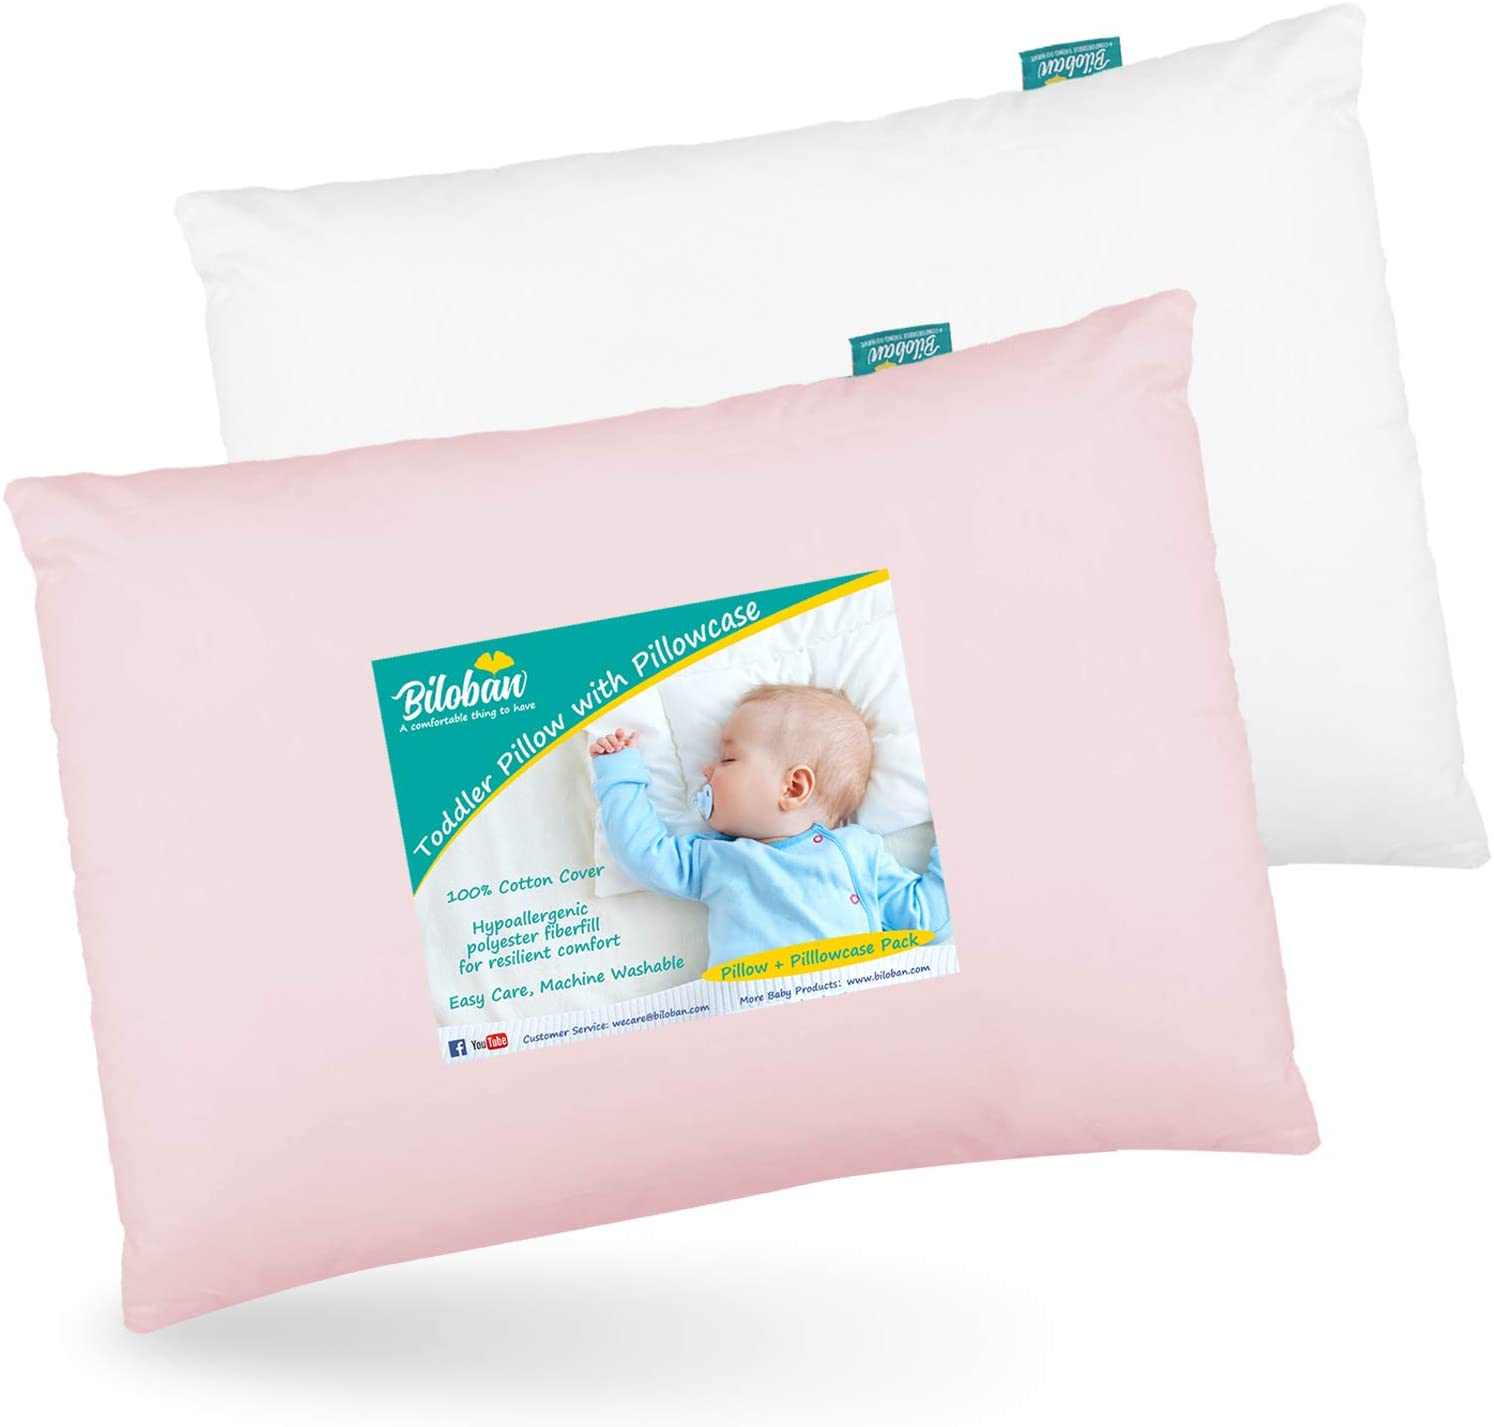 Toddler Pillow Quilted with Pillowcase - 2 Pack, 13" x 18", 100% Cotton, Ultra Soft & Breathable, White & Pink - Biloban Online Store